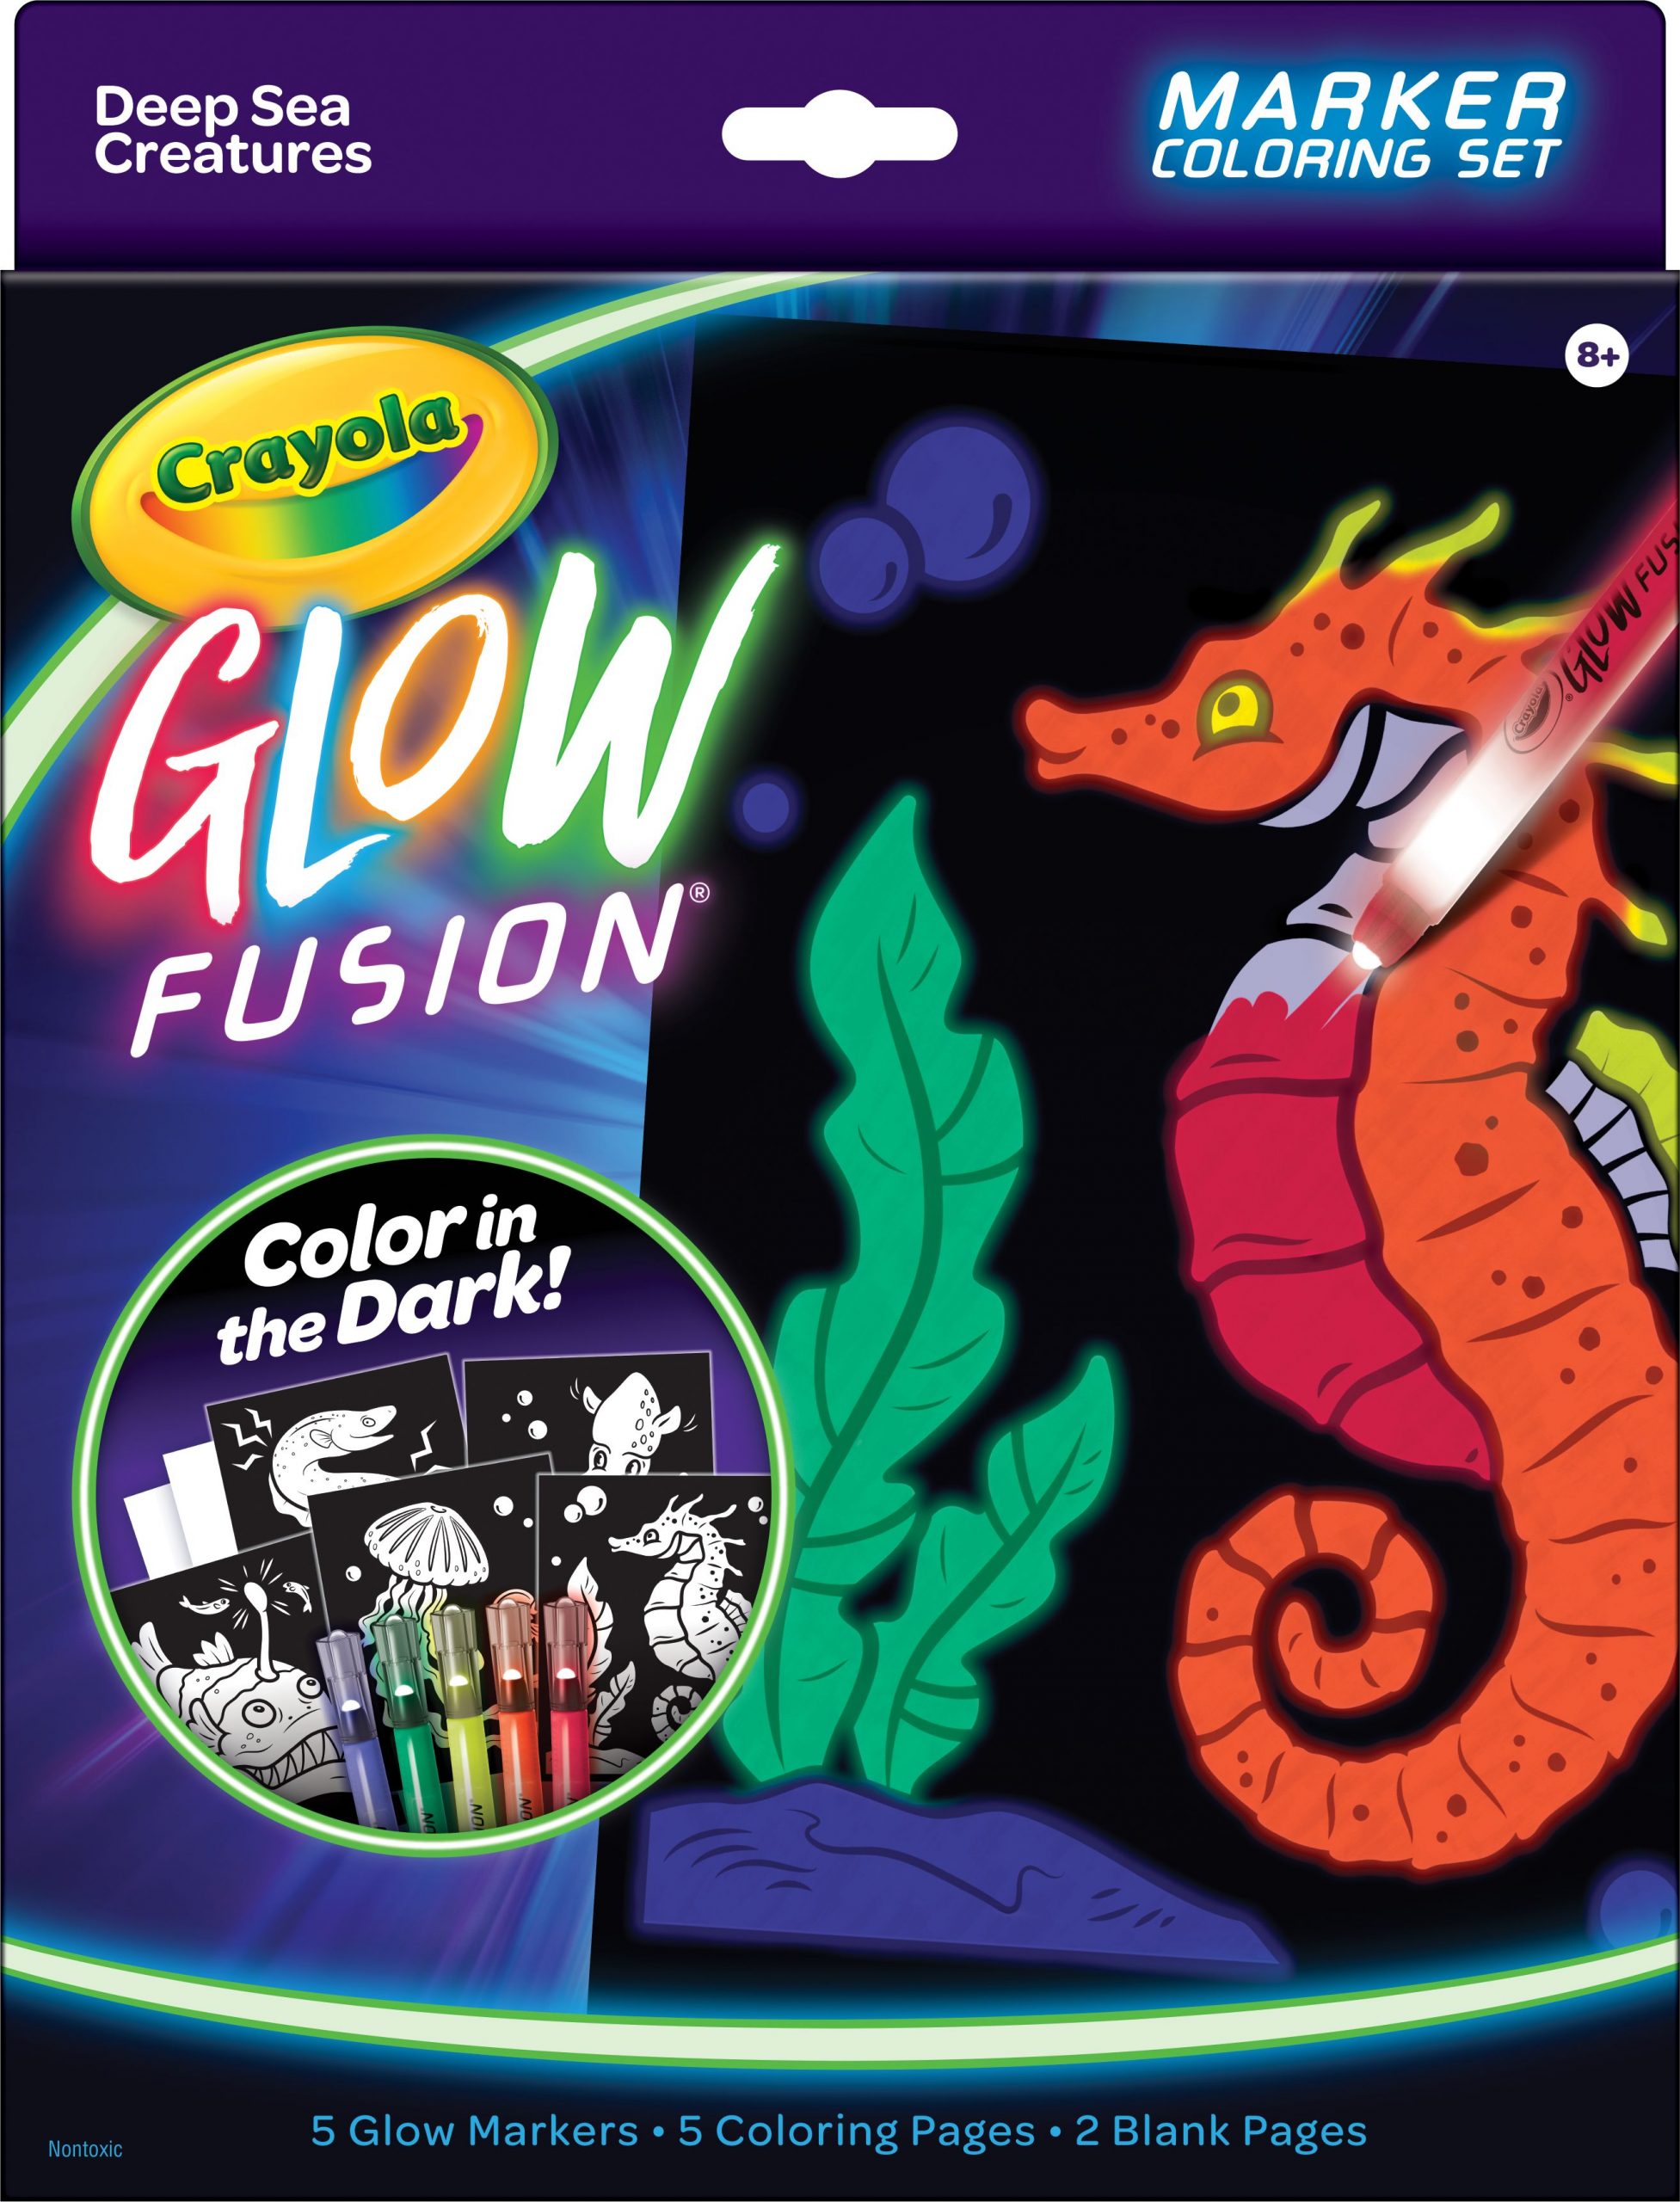 Glow Fusion Marker Coloring Set